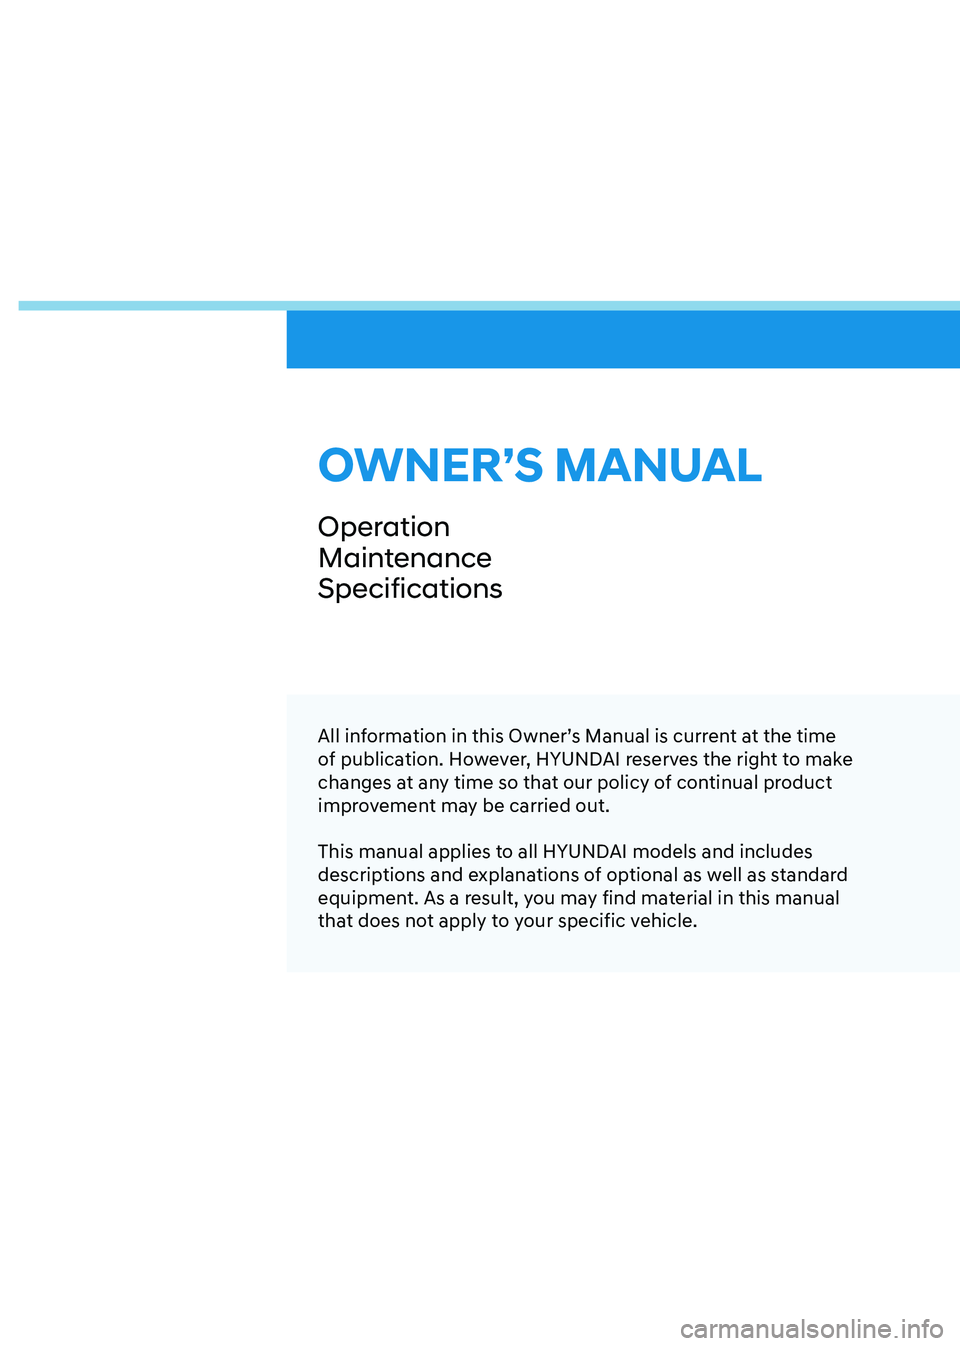 HYUNDAI SONATA HYBRID 2022  Owners Manual OWNER’S MANUAL
Operation
Maintenance
Specifications
All information in this Owner’s Manual is current at the time 
of publication. However, HYUNDAI reserves the right to make 
changes at any time 